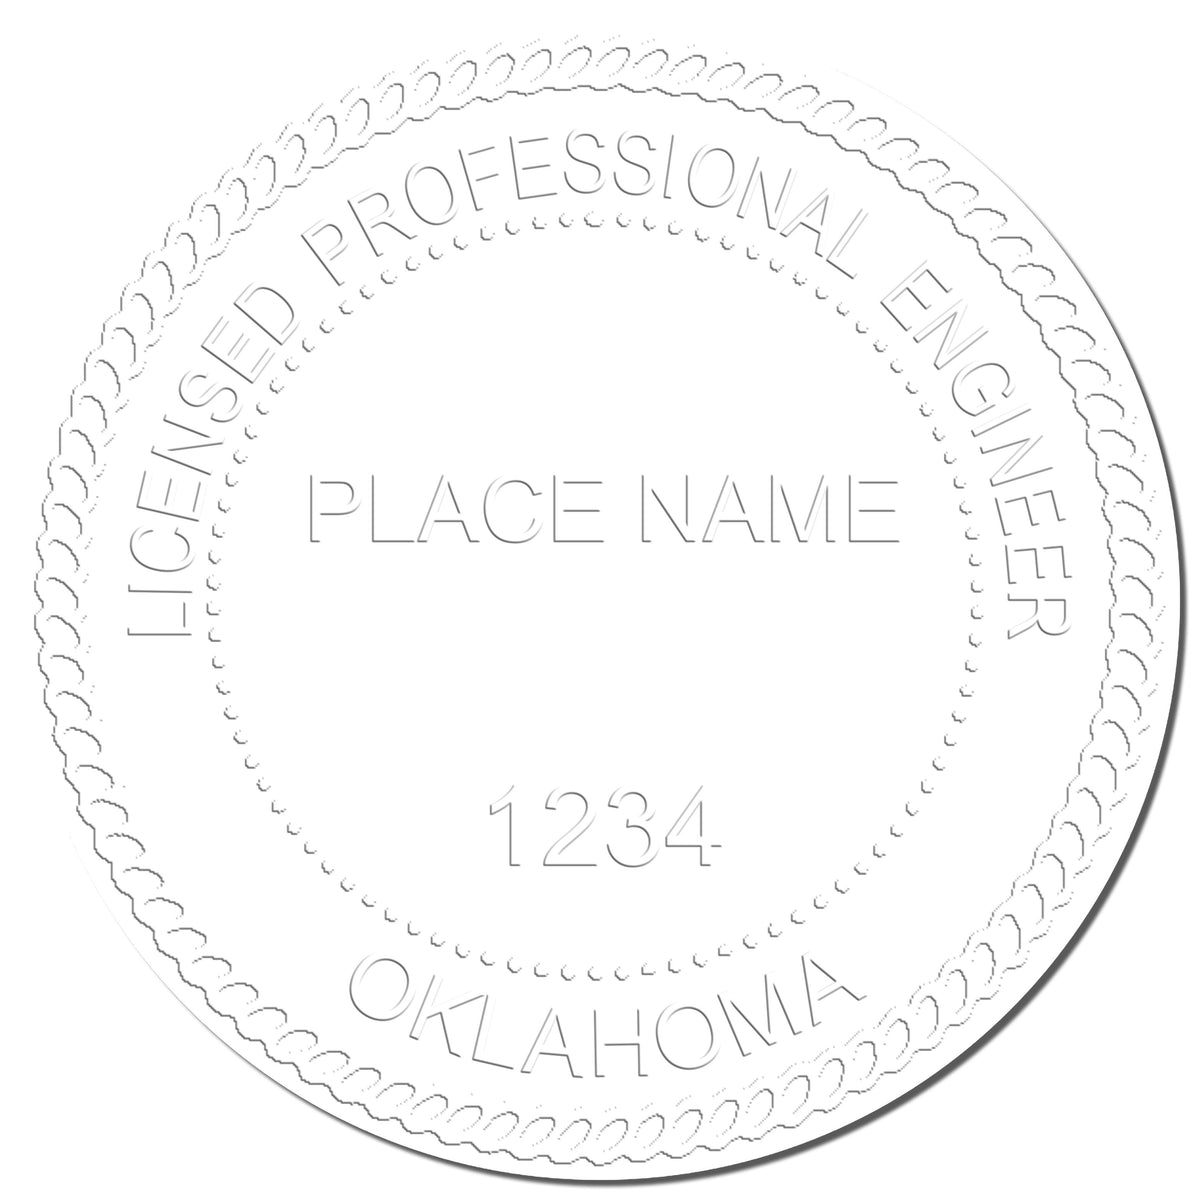 This paper is stamped with a sample imprint of the Hybrid Oklahoma Engineer Seal, signifying its quality and reliability.